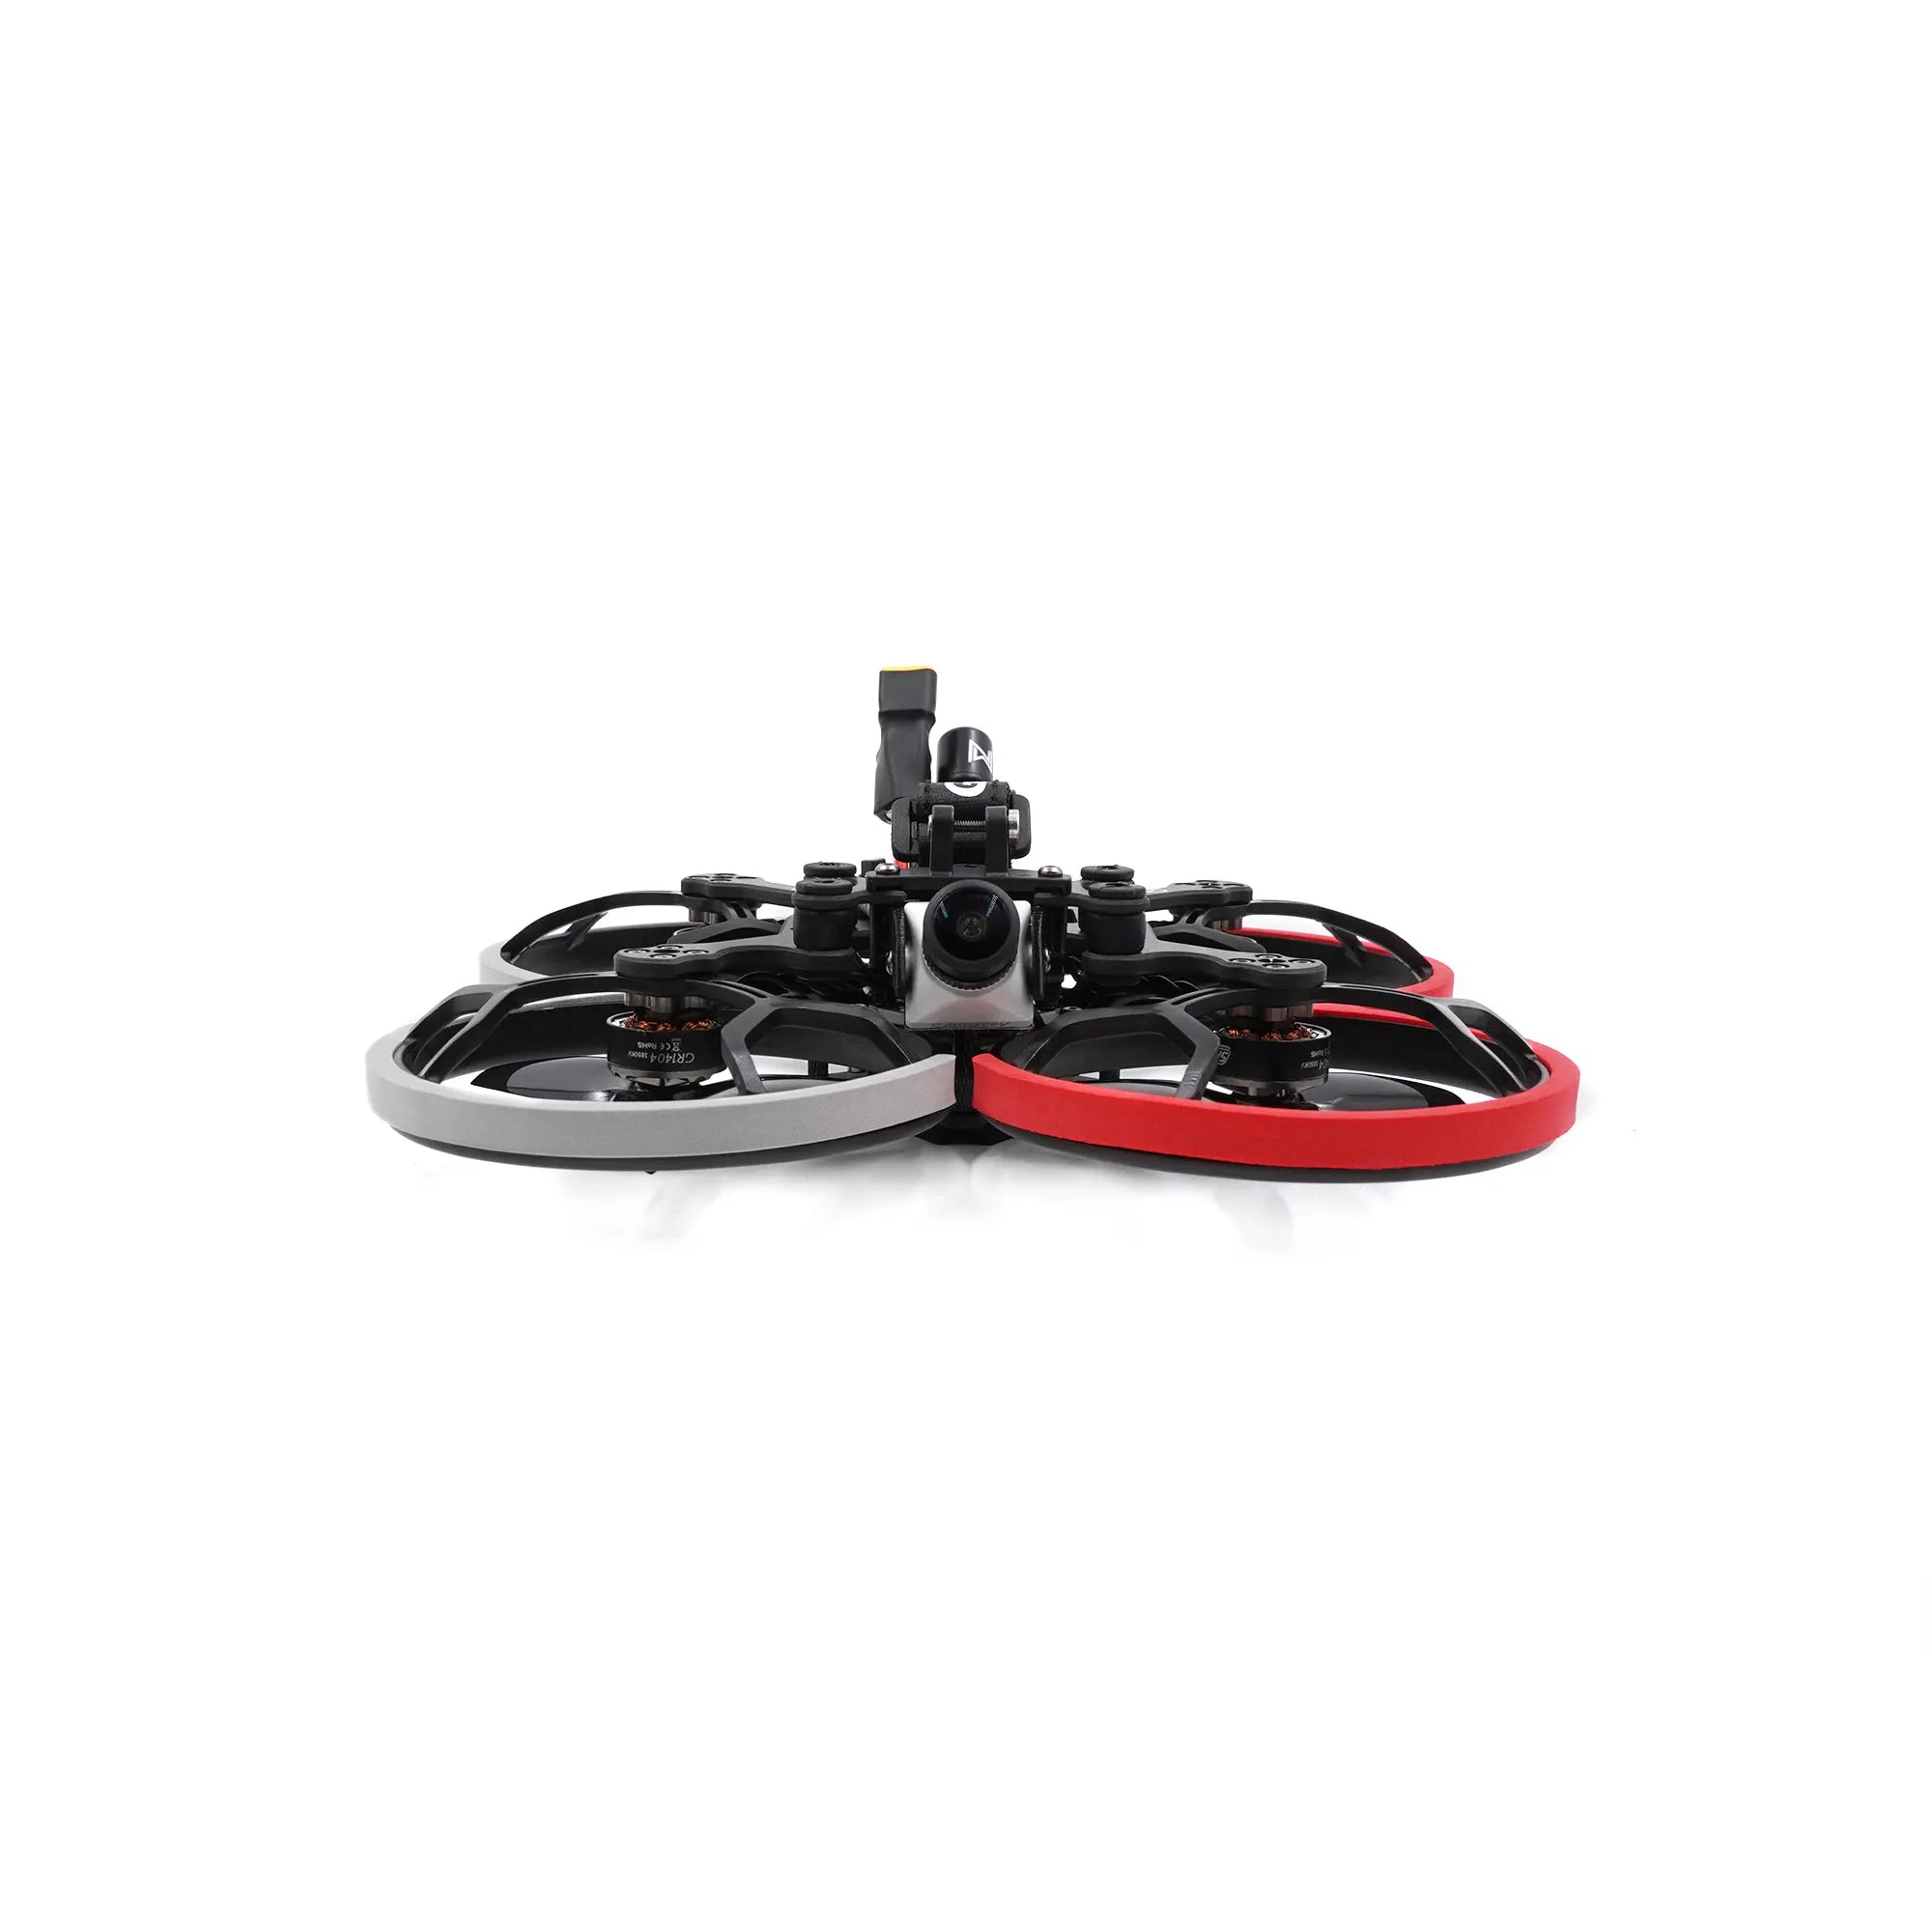 GEPRC CineLog30 HD FPV, durable high-impact Carbon material with good toughness and strength .